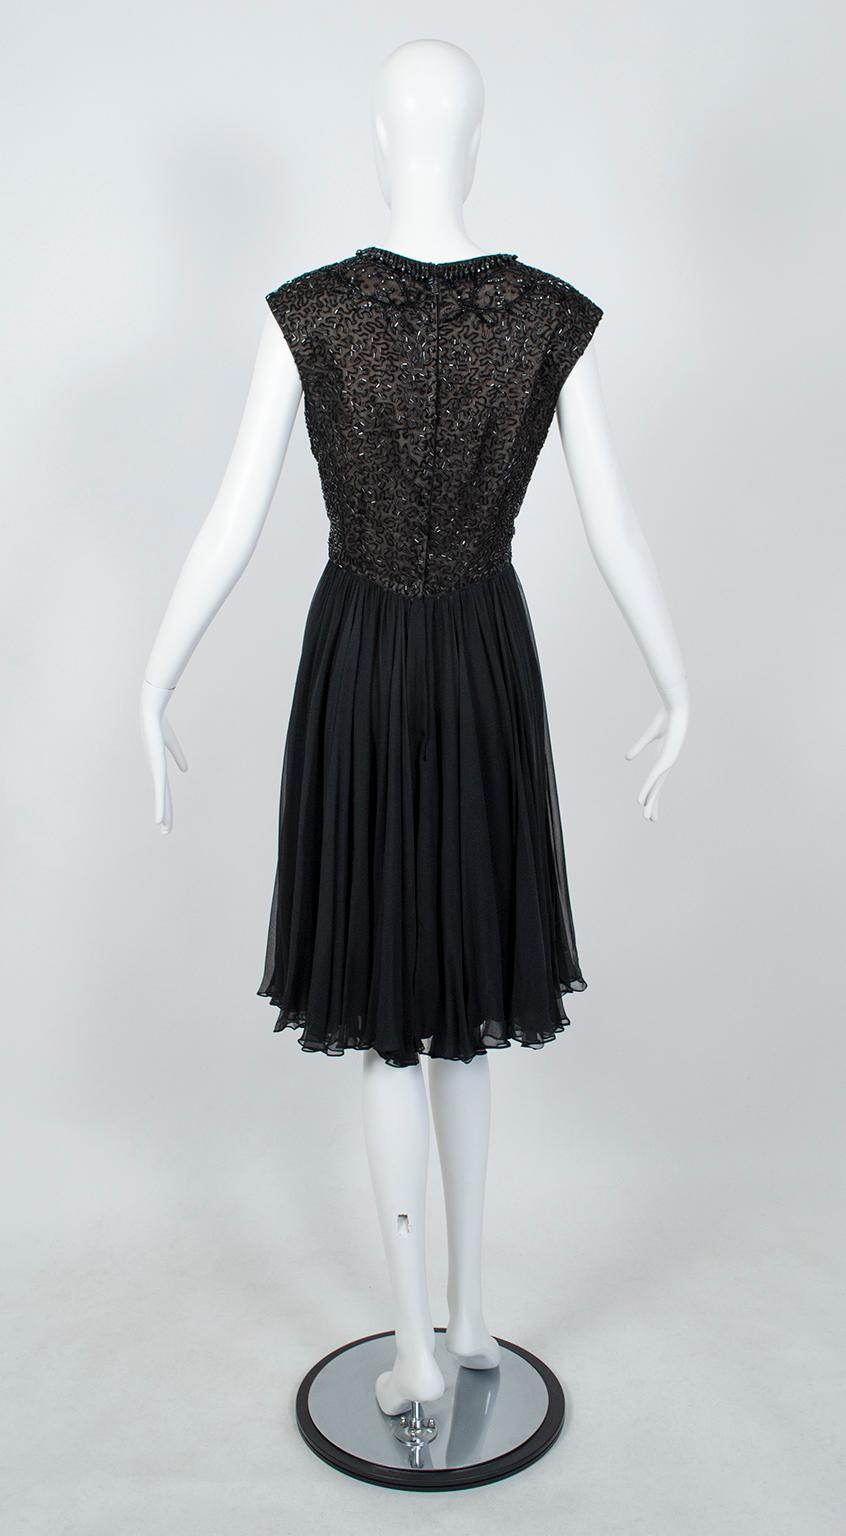 Black Chandelier Bead Illusion Party Dress with Swirling Trumpet Skirt– M, 1950s In Good Condition For Sale In Tucson, AZ